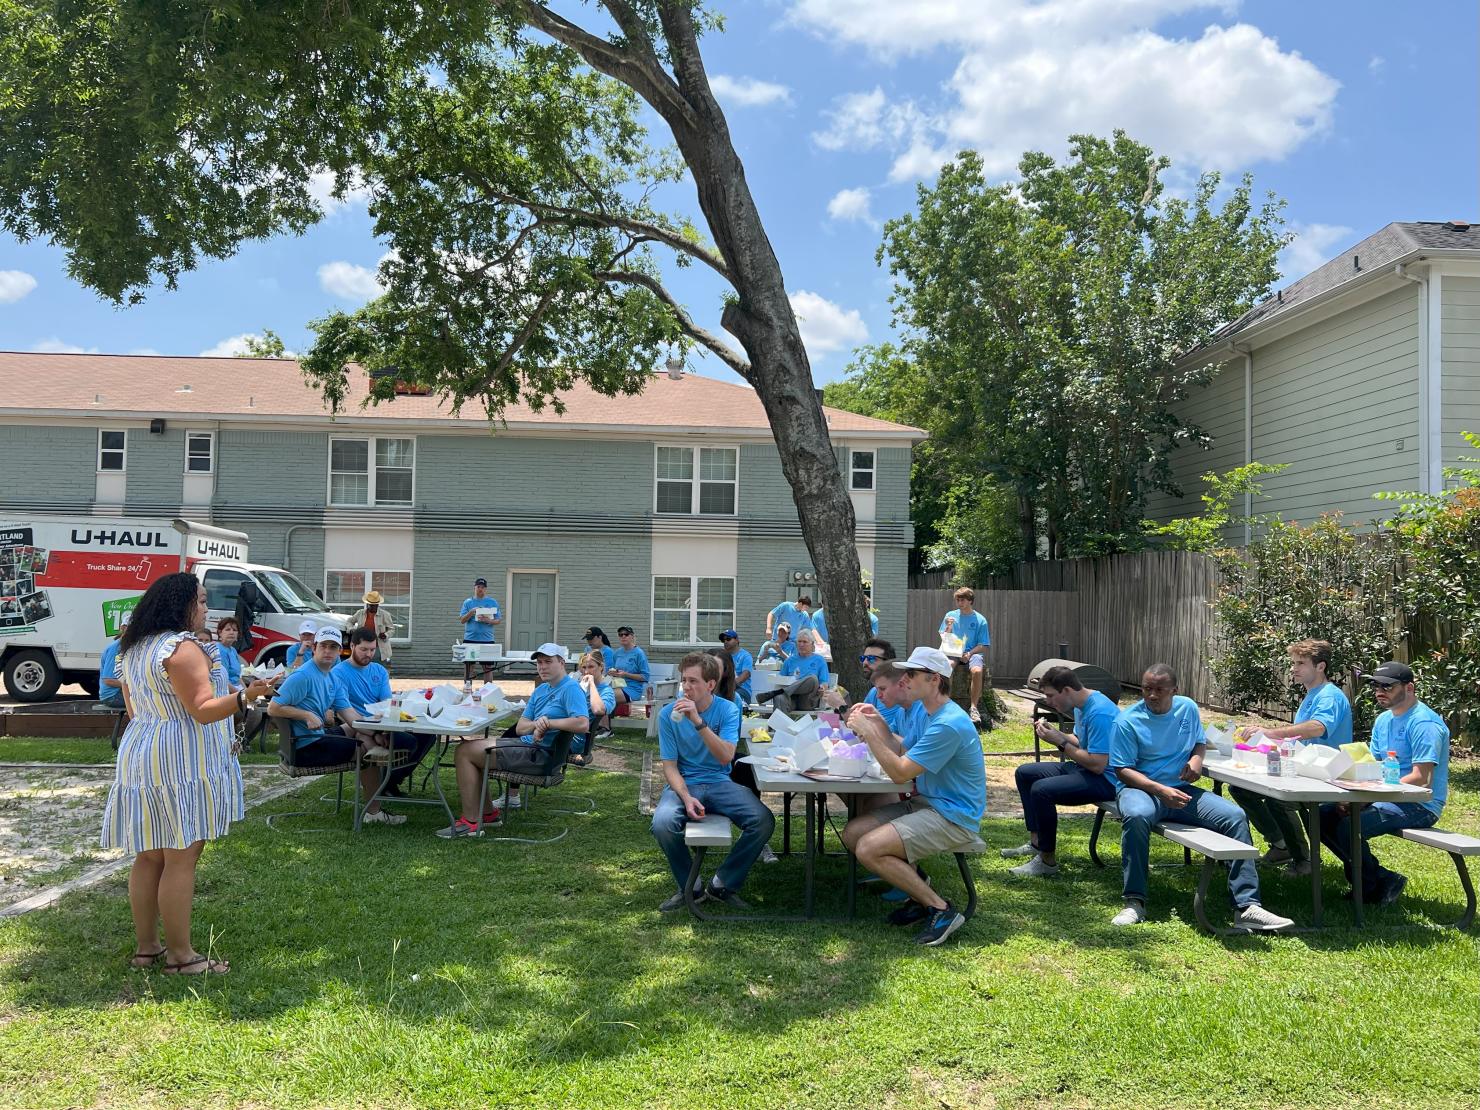 After completing the volunteer work, employees listen to an impactful presentation by one of Santa Maria’s former residents during lunch.After completing the volunteer work, employees listen to an impactful presentation by one of Santa Maria’s former residents during lunch.